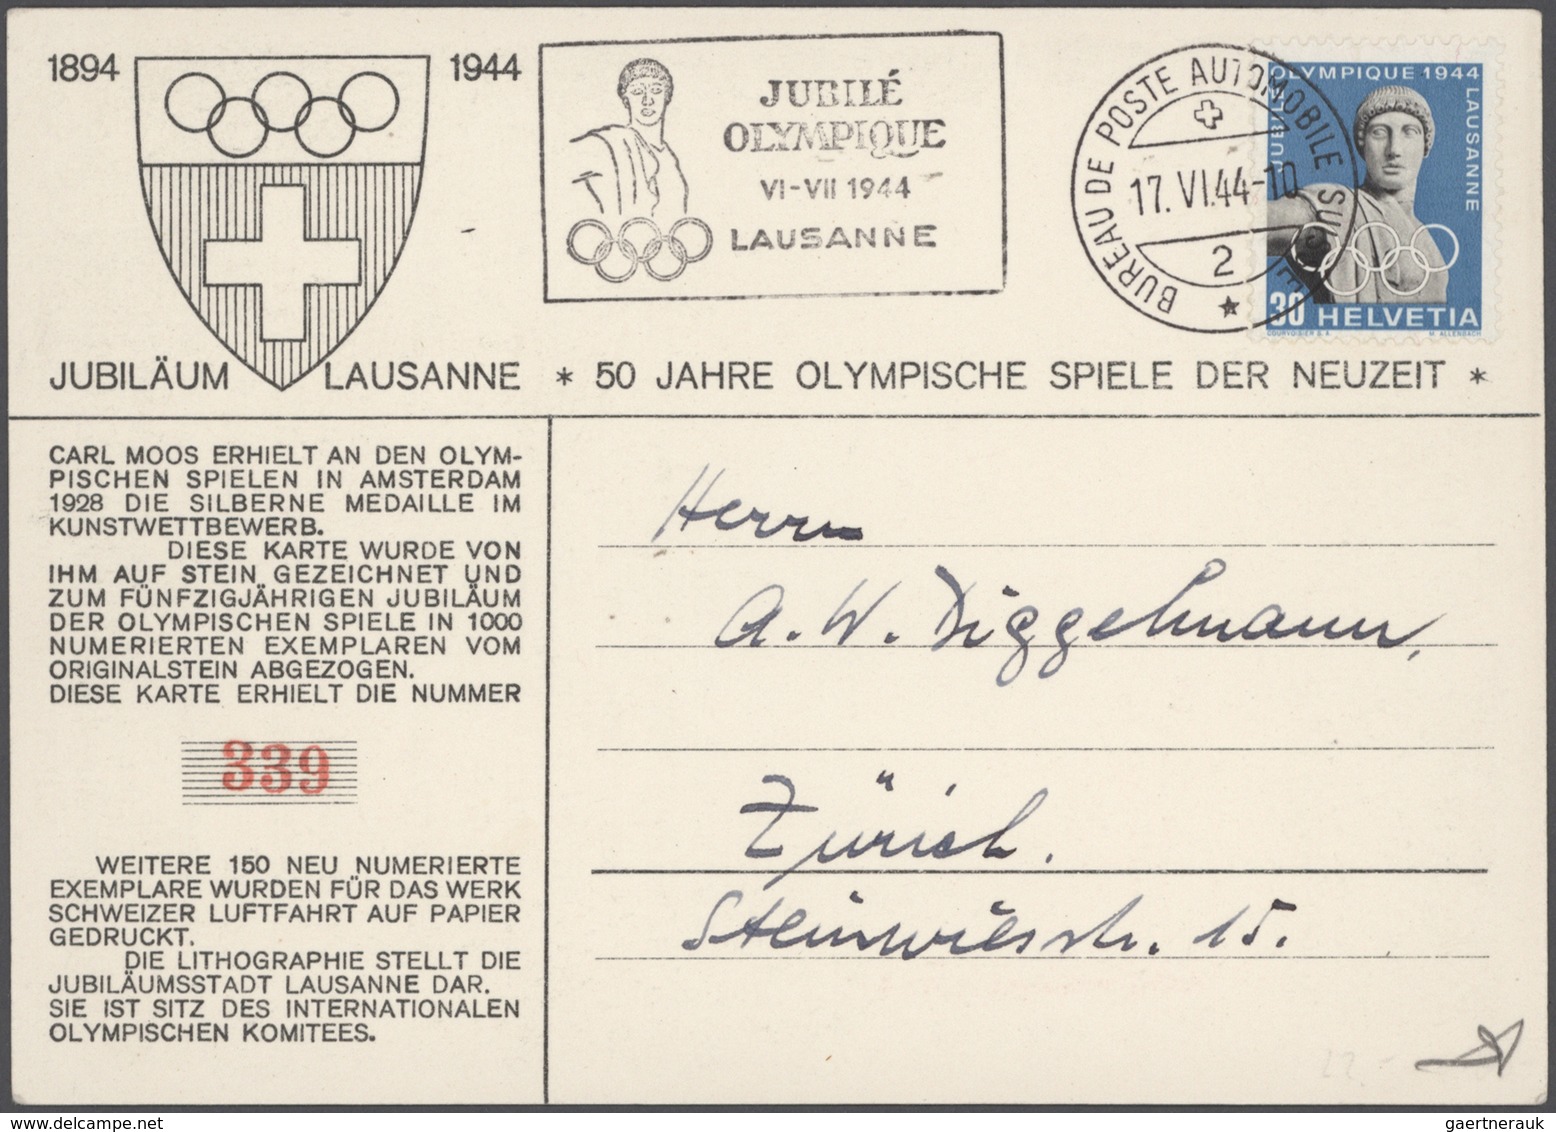 Thematik: Olympische Spiele / olympic games: 1896/1960(ca.), OLYMPIC GAMES, fine collection of speci